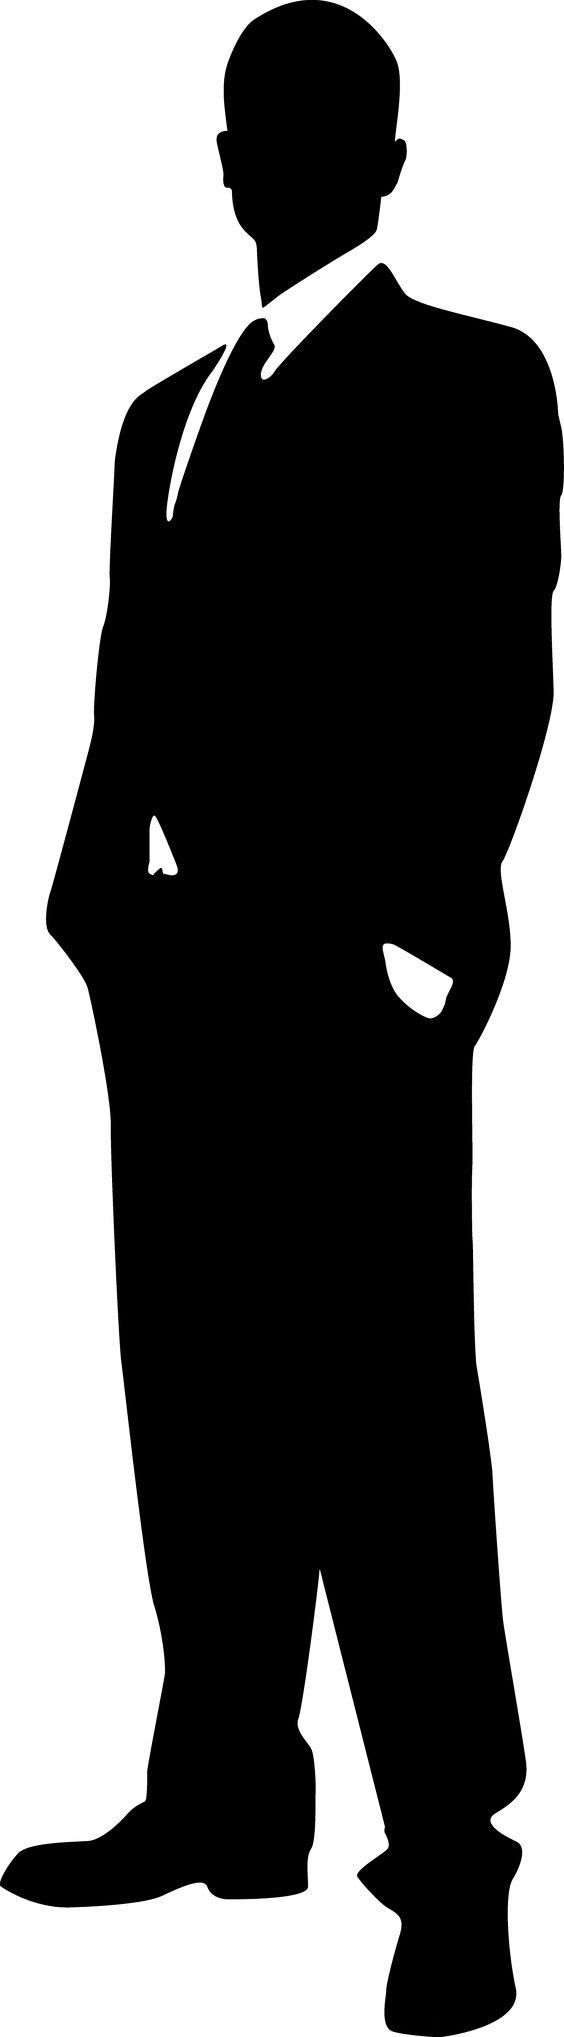 Hot guy clipart silhouette